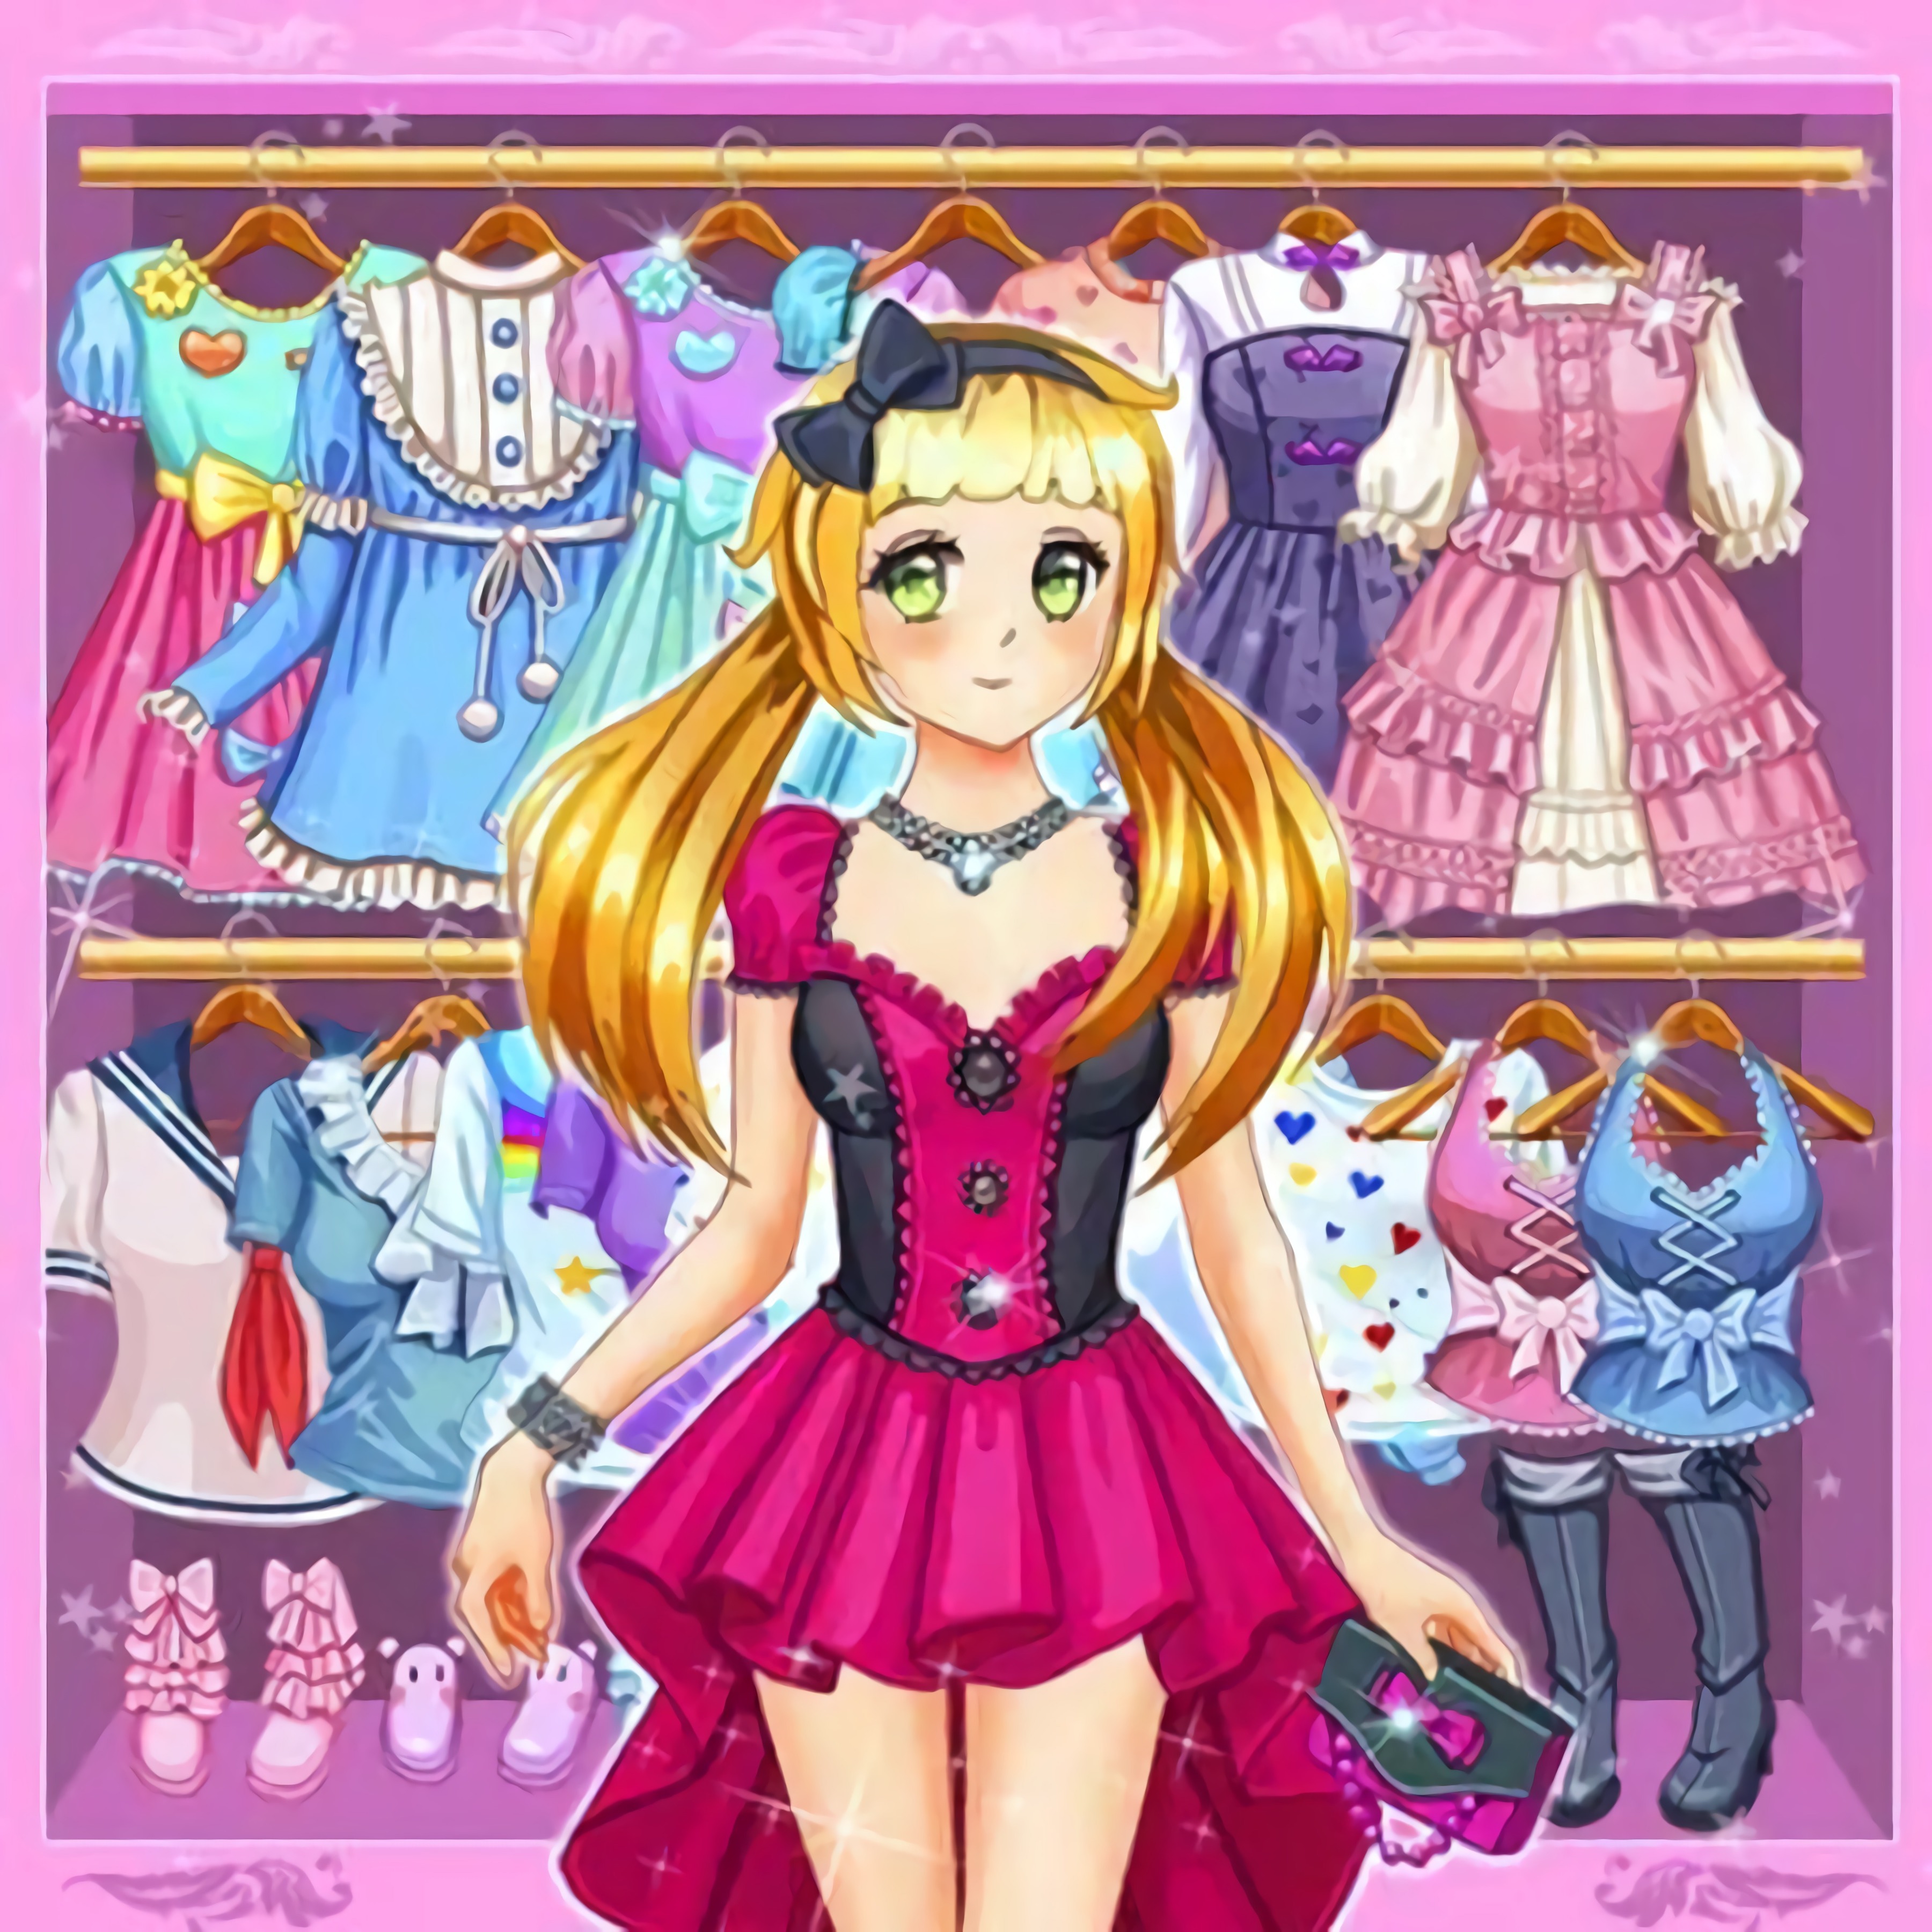 Pixelthreads: Reclaiming the Dress-Up Game | The Mary Sue